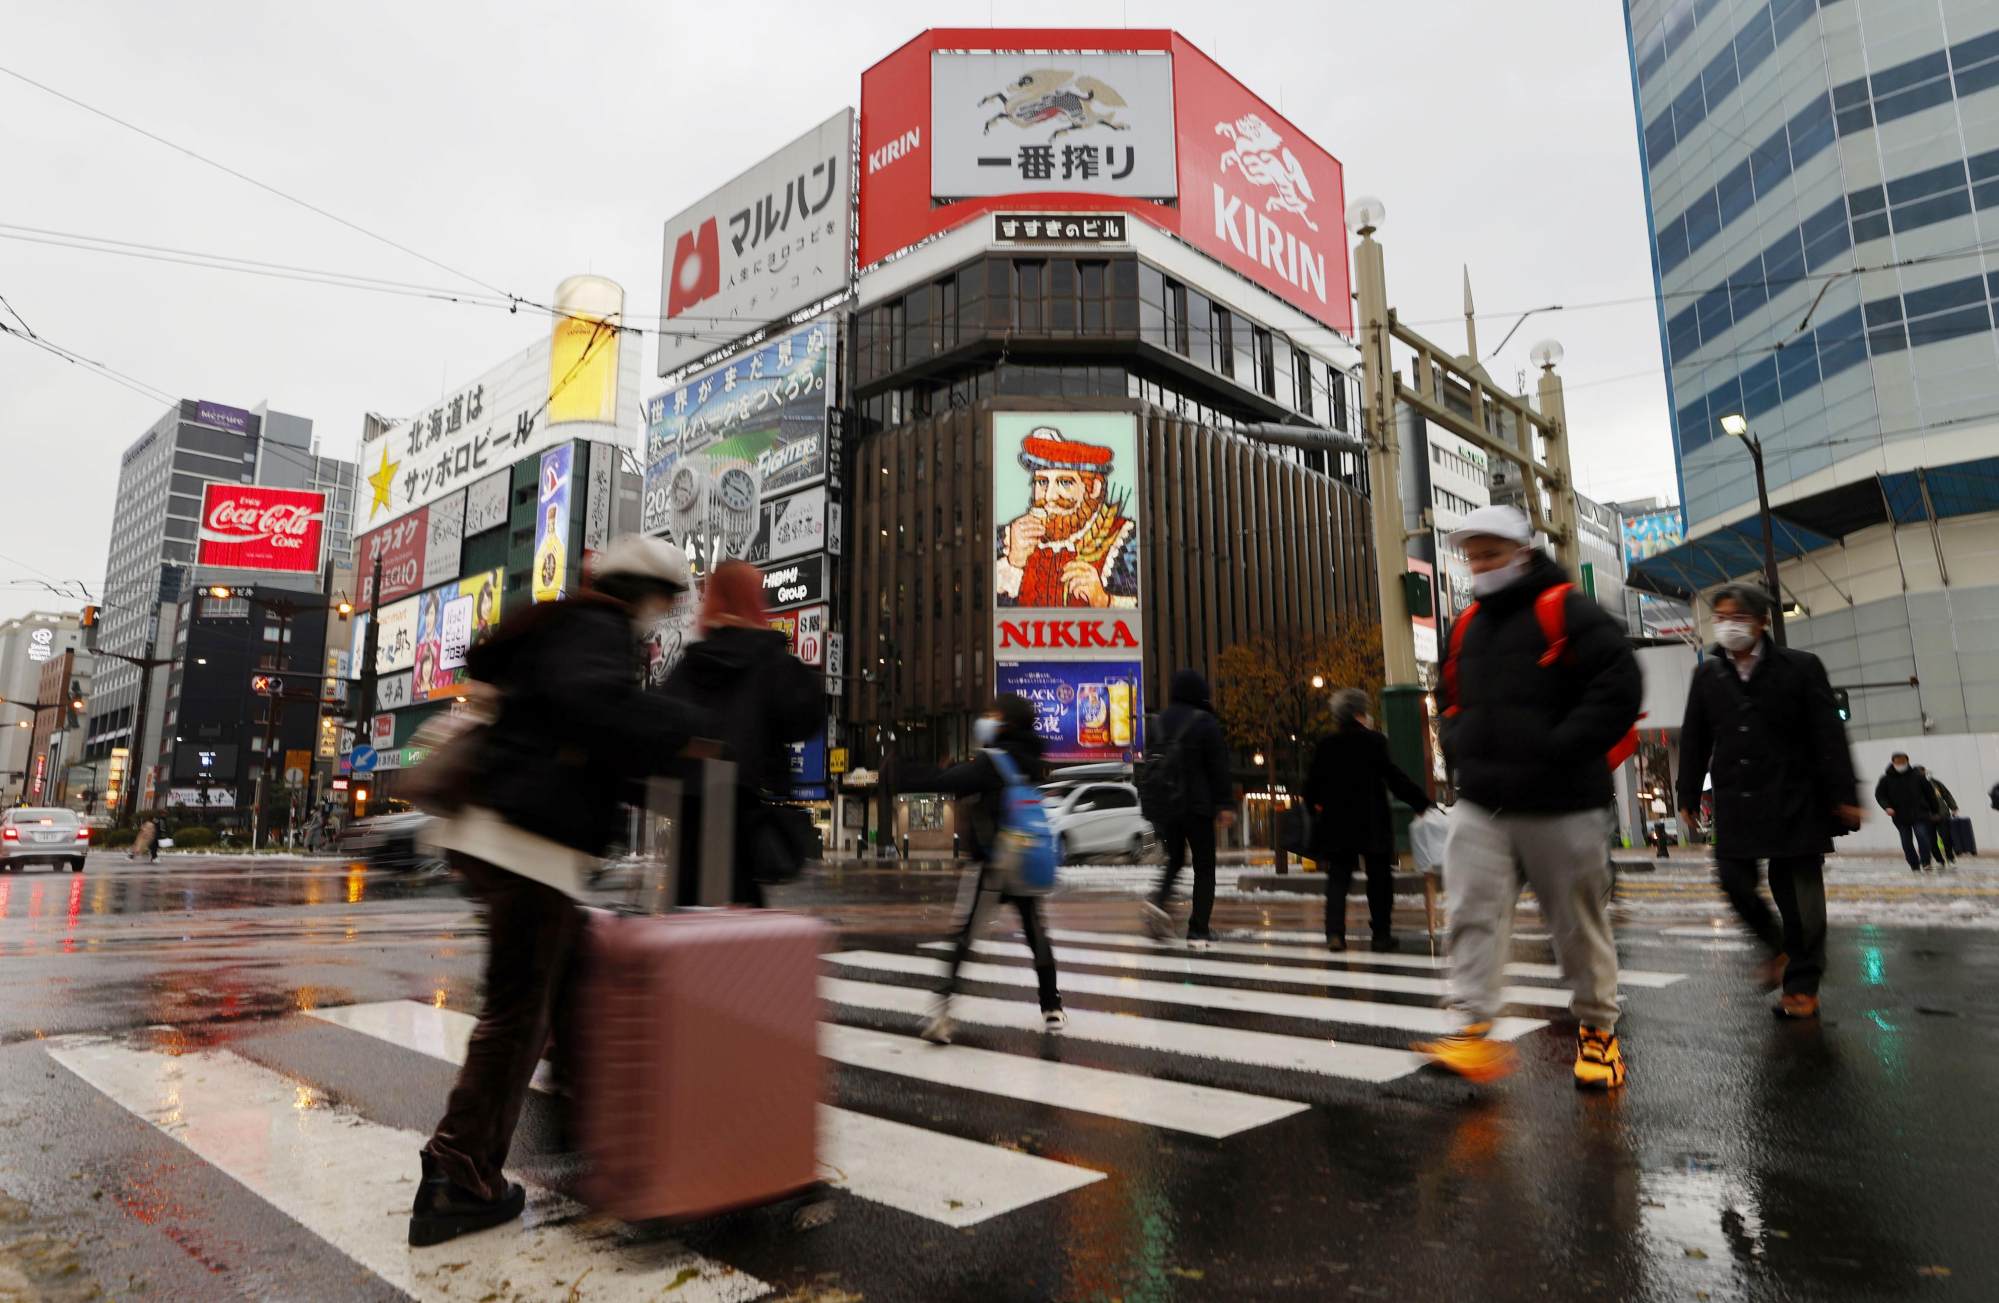 The incident occurred in the Susukino area of Sapporo where many love hotels are located. Photo: Kyodo